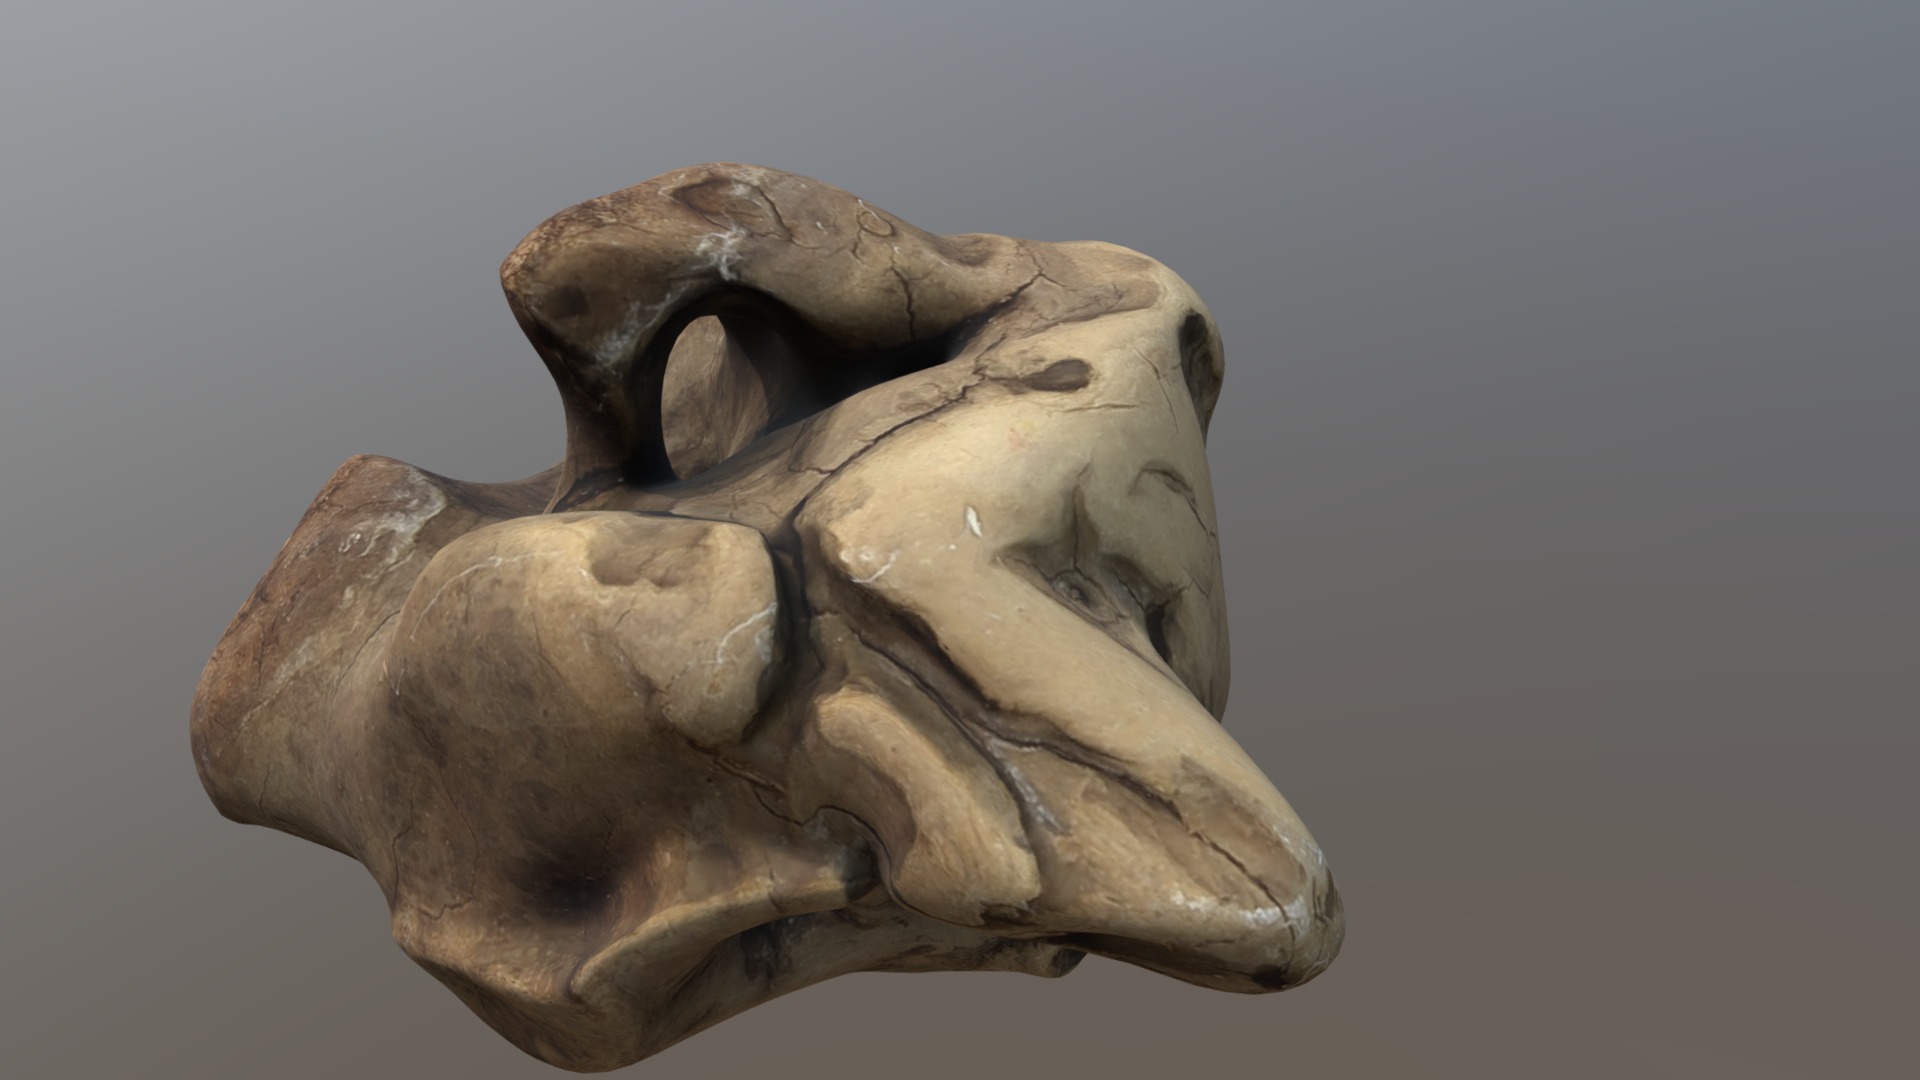 3D model Wood Root - This is a 3D model of the Wood Root. The 3D model is about a sculpture of a lion.